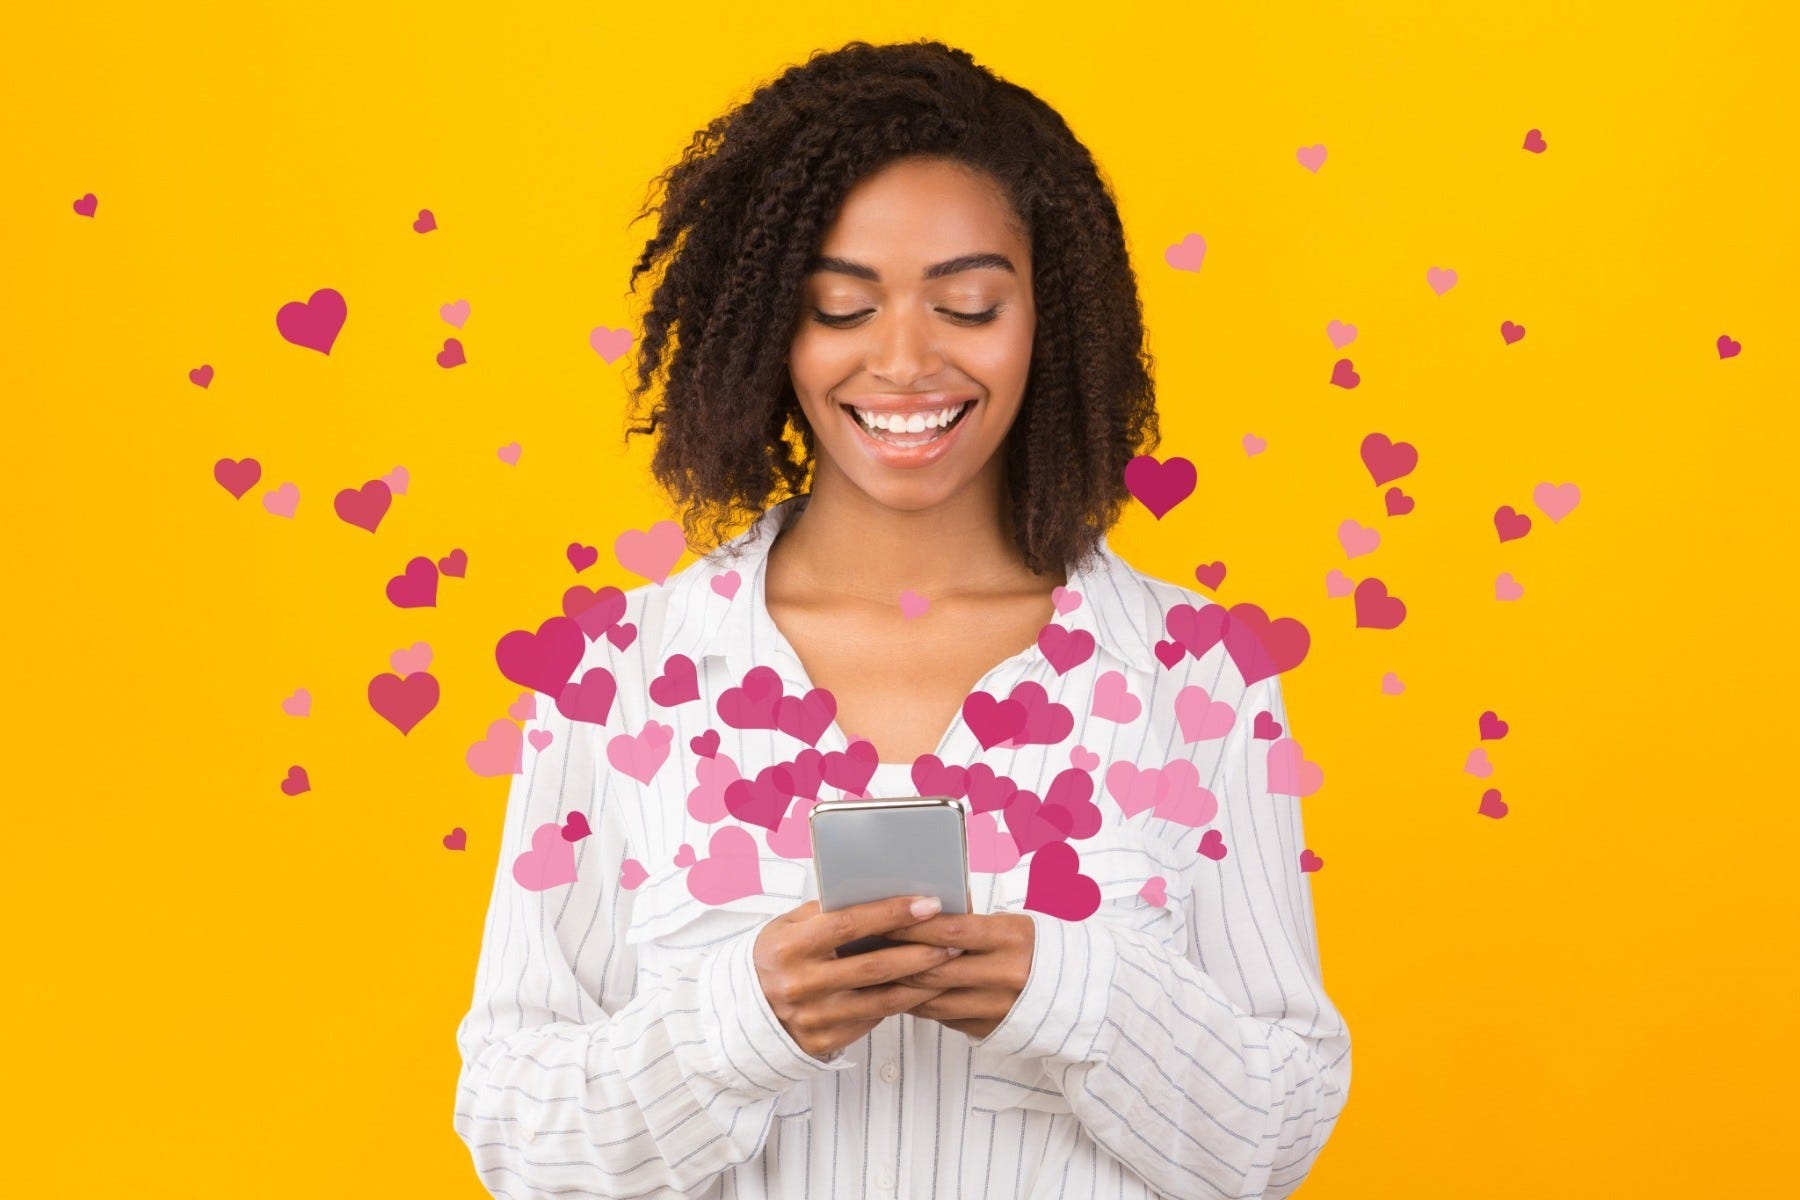 A woman on her phone receiving texts as hearts